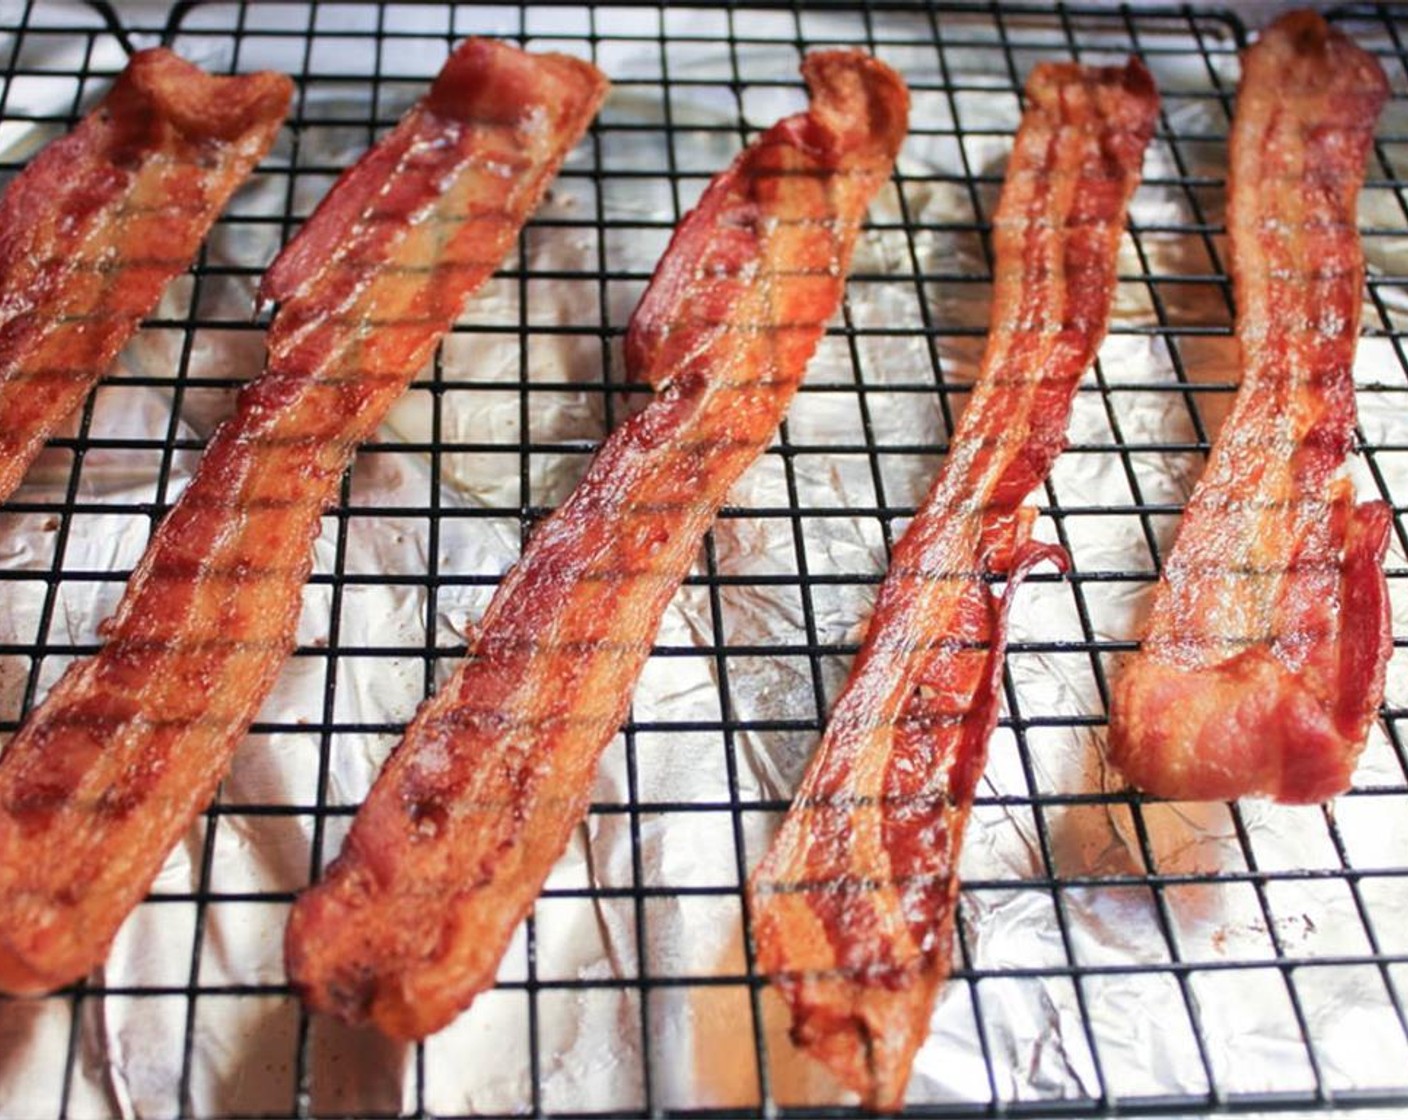 step 5 Place the Bacon (6 slices) on a rack over a foil lined baking sheet. Bake for 25 minutes until brown and crispy. When cool enough to handle, crumble the bacon and set aside until ready to use.